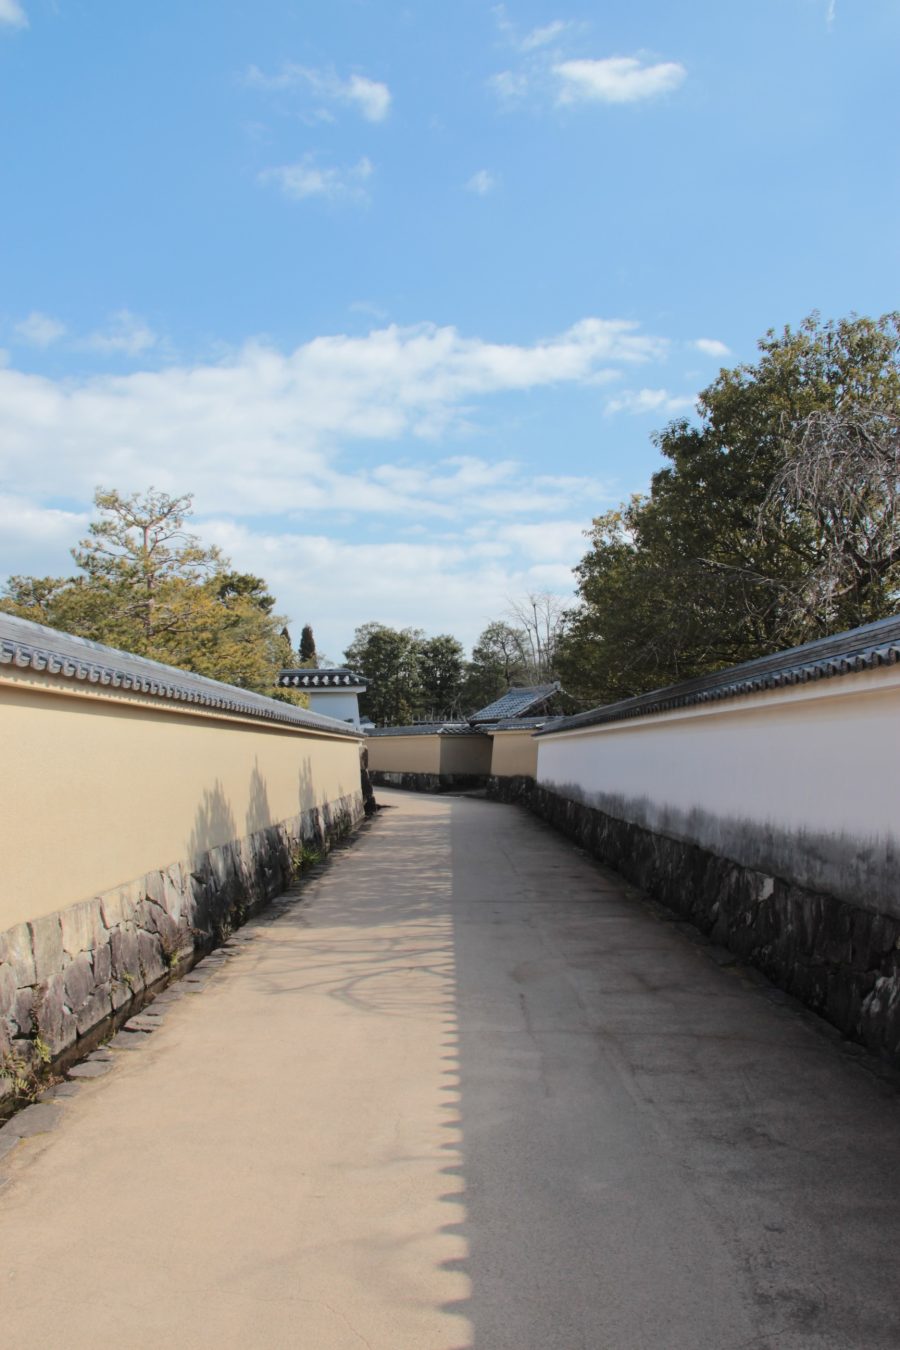 Exploring the majesty of Himeji Castle: a journey through time